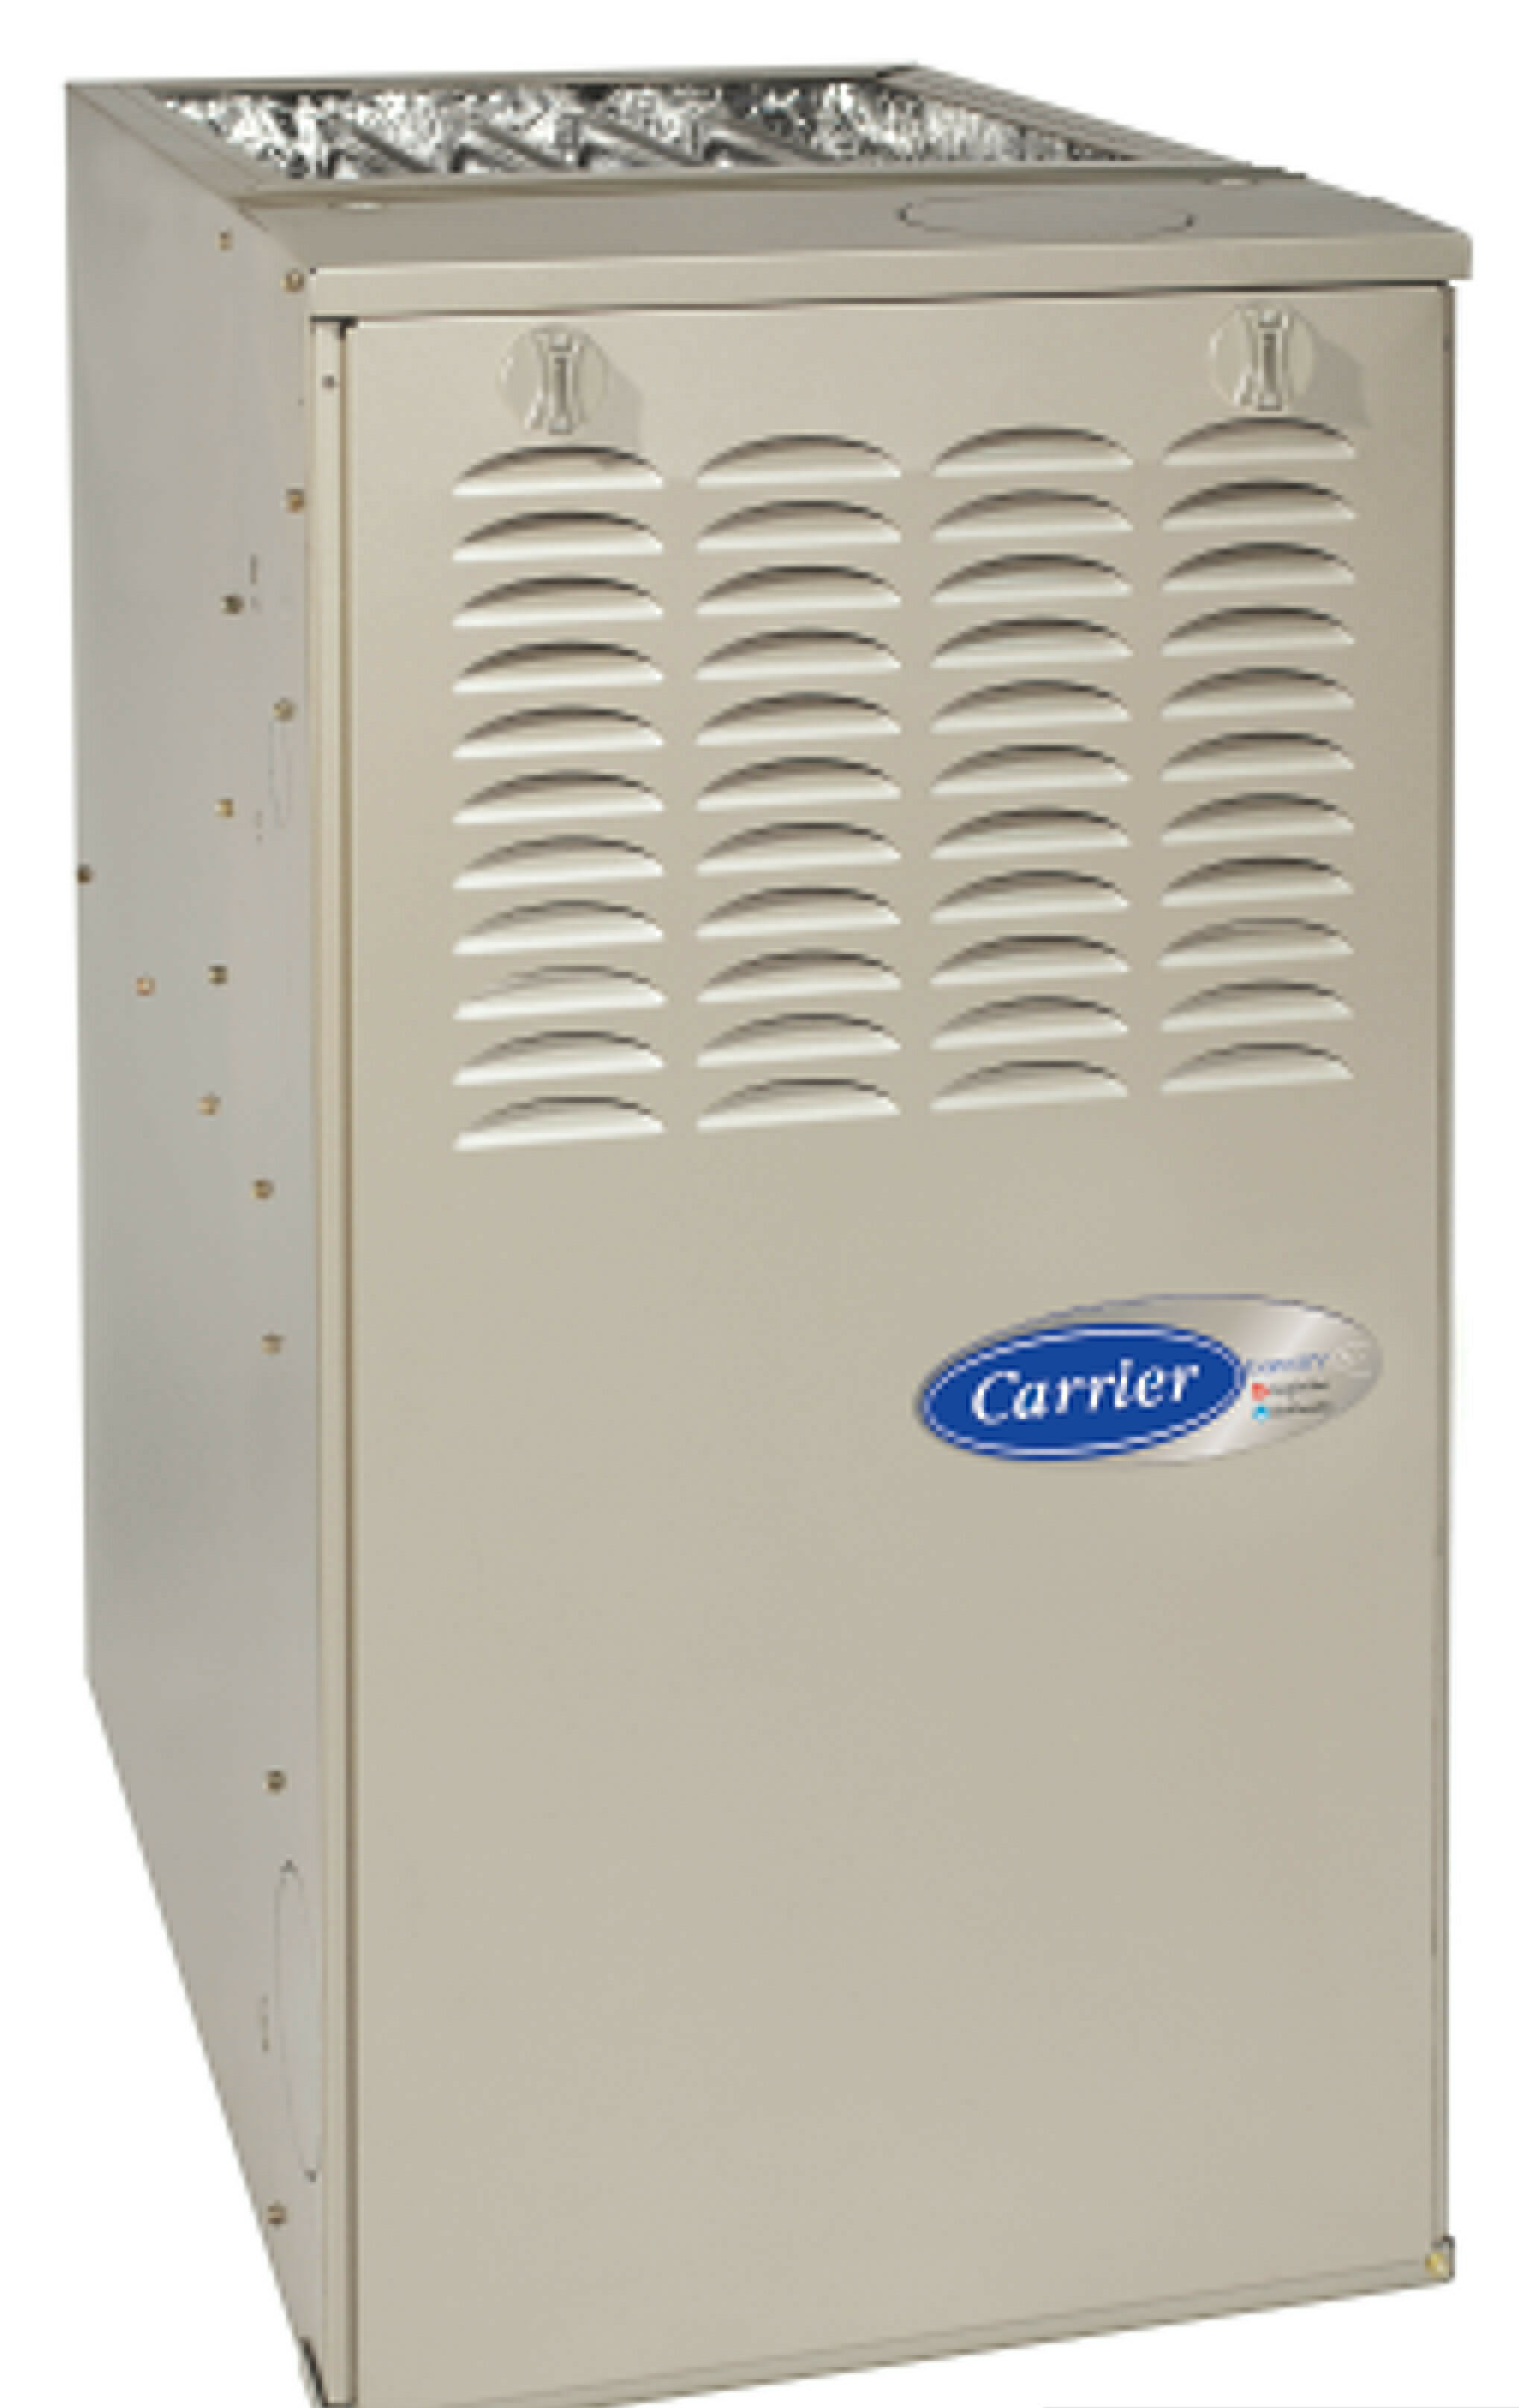 Carrier heating equipment from Warren Heating and Cooling